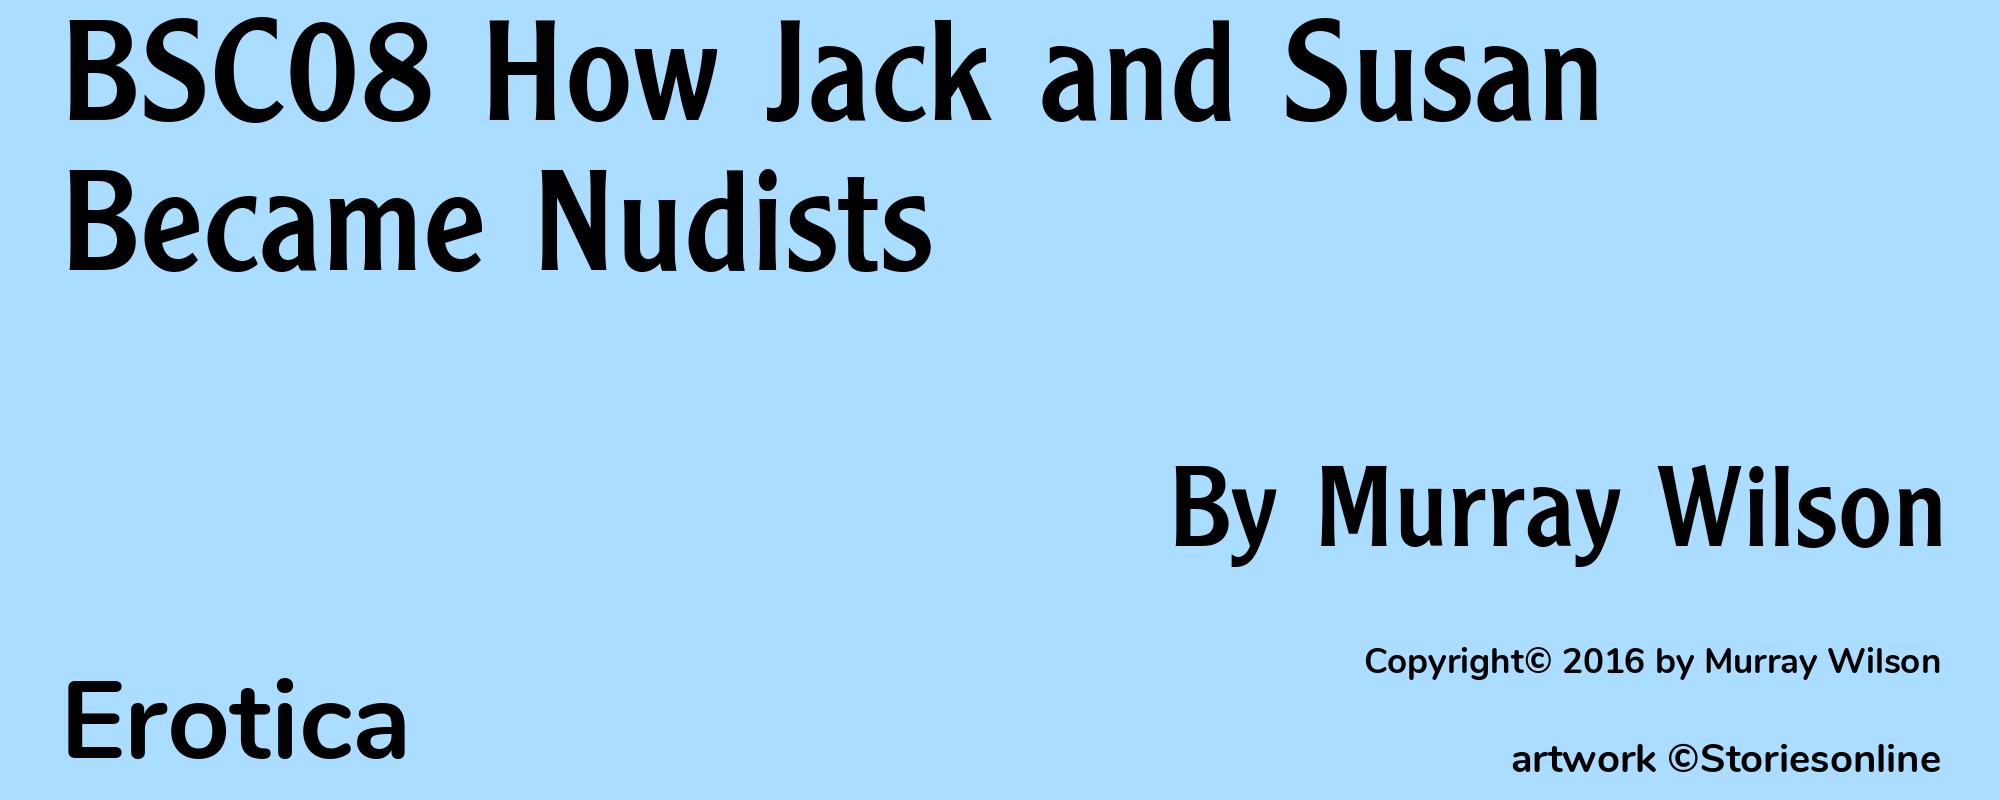 BSC08 How Jack and Susan Became Nudists - Cover